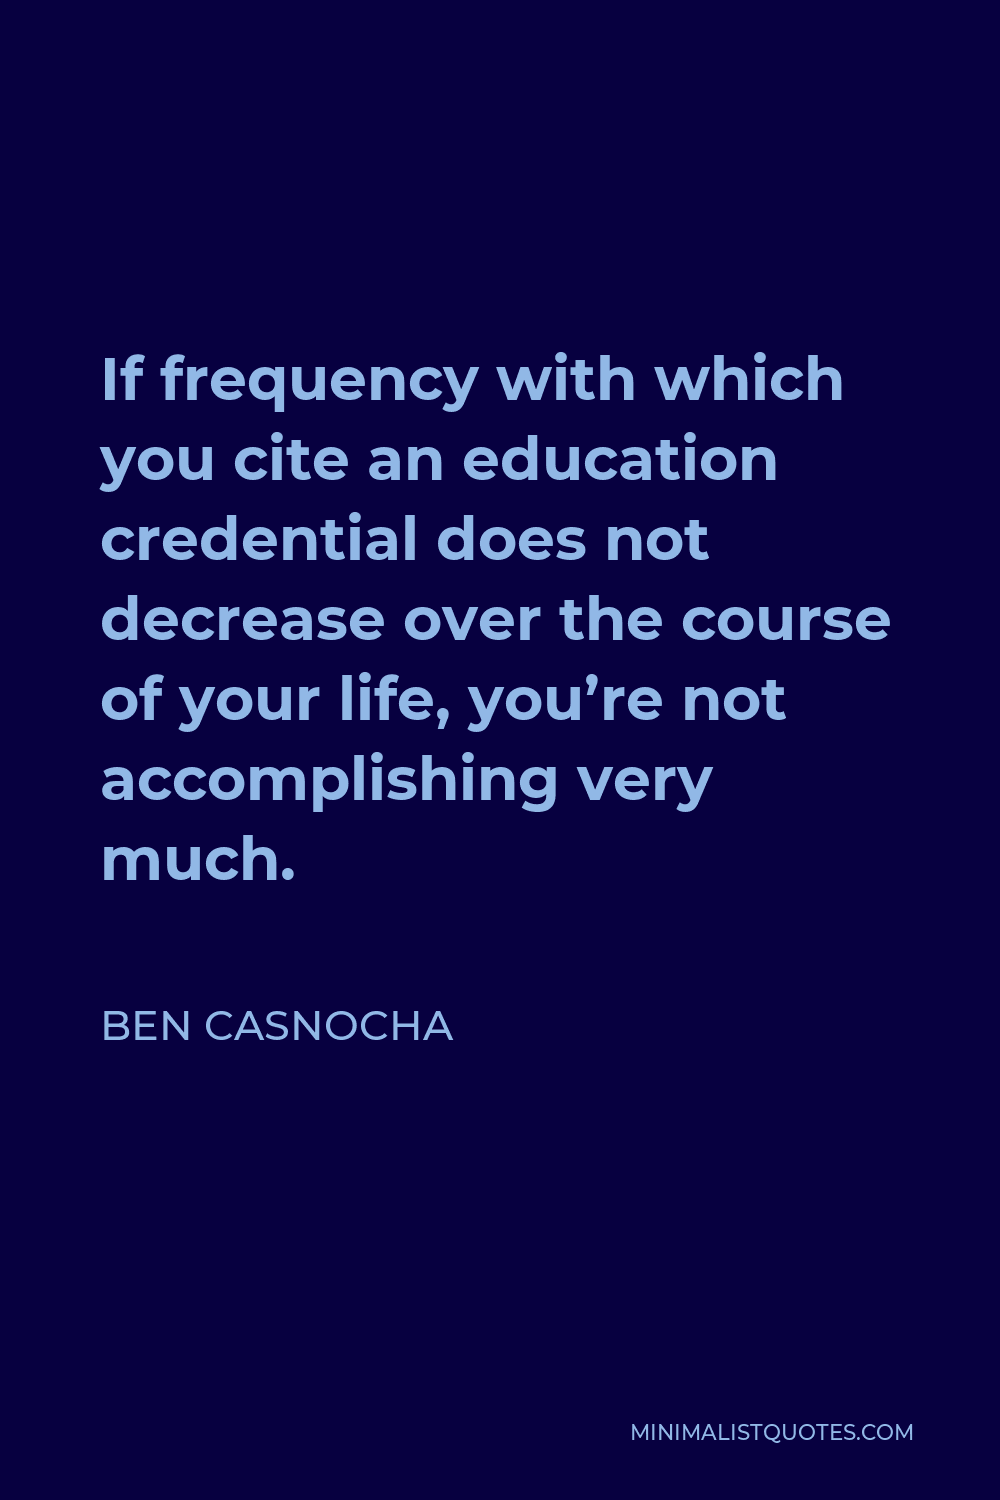 Ben Casnocha Quote - If frequency with which you cite an education credential does not decrease over the course of your life, you’re not accomplishing very much.